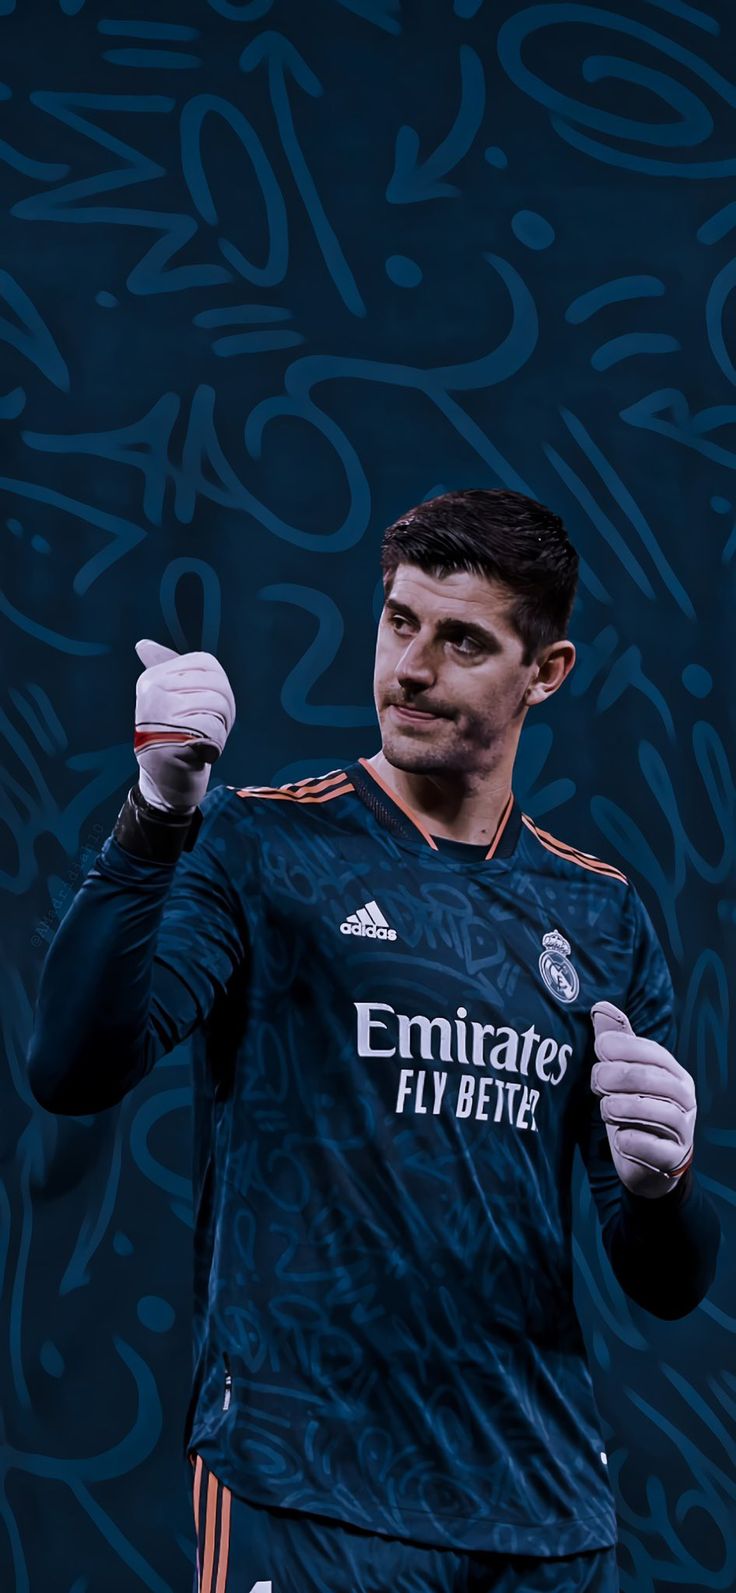 Courtois wallpaper. Real madrid wallpaper, Real madrid picture, Real madrid players